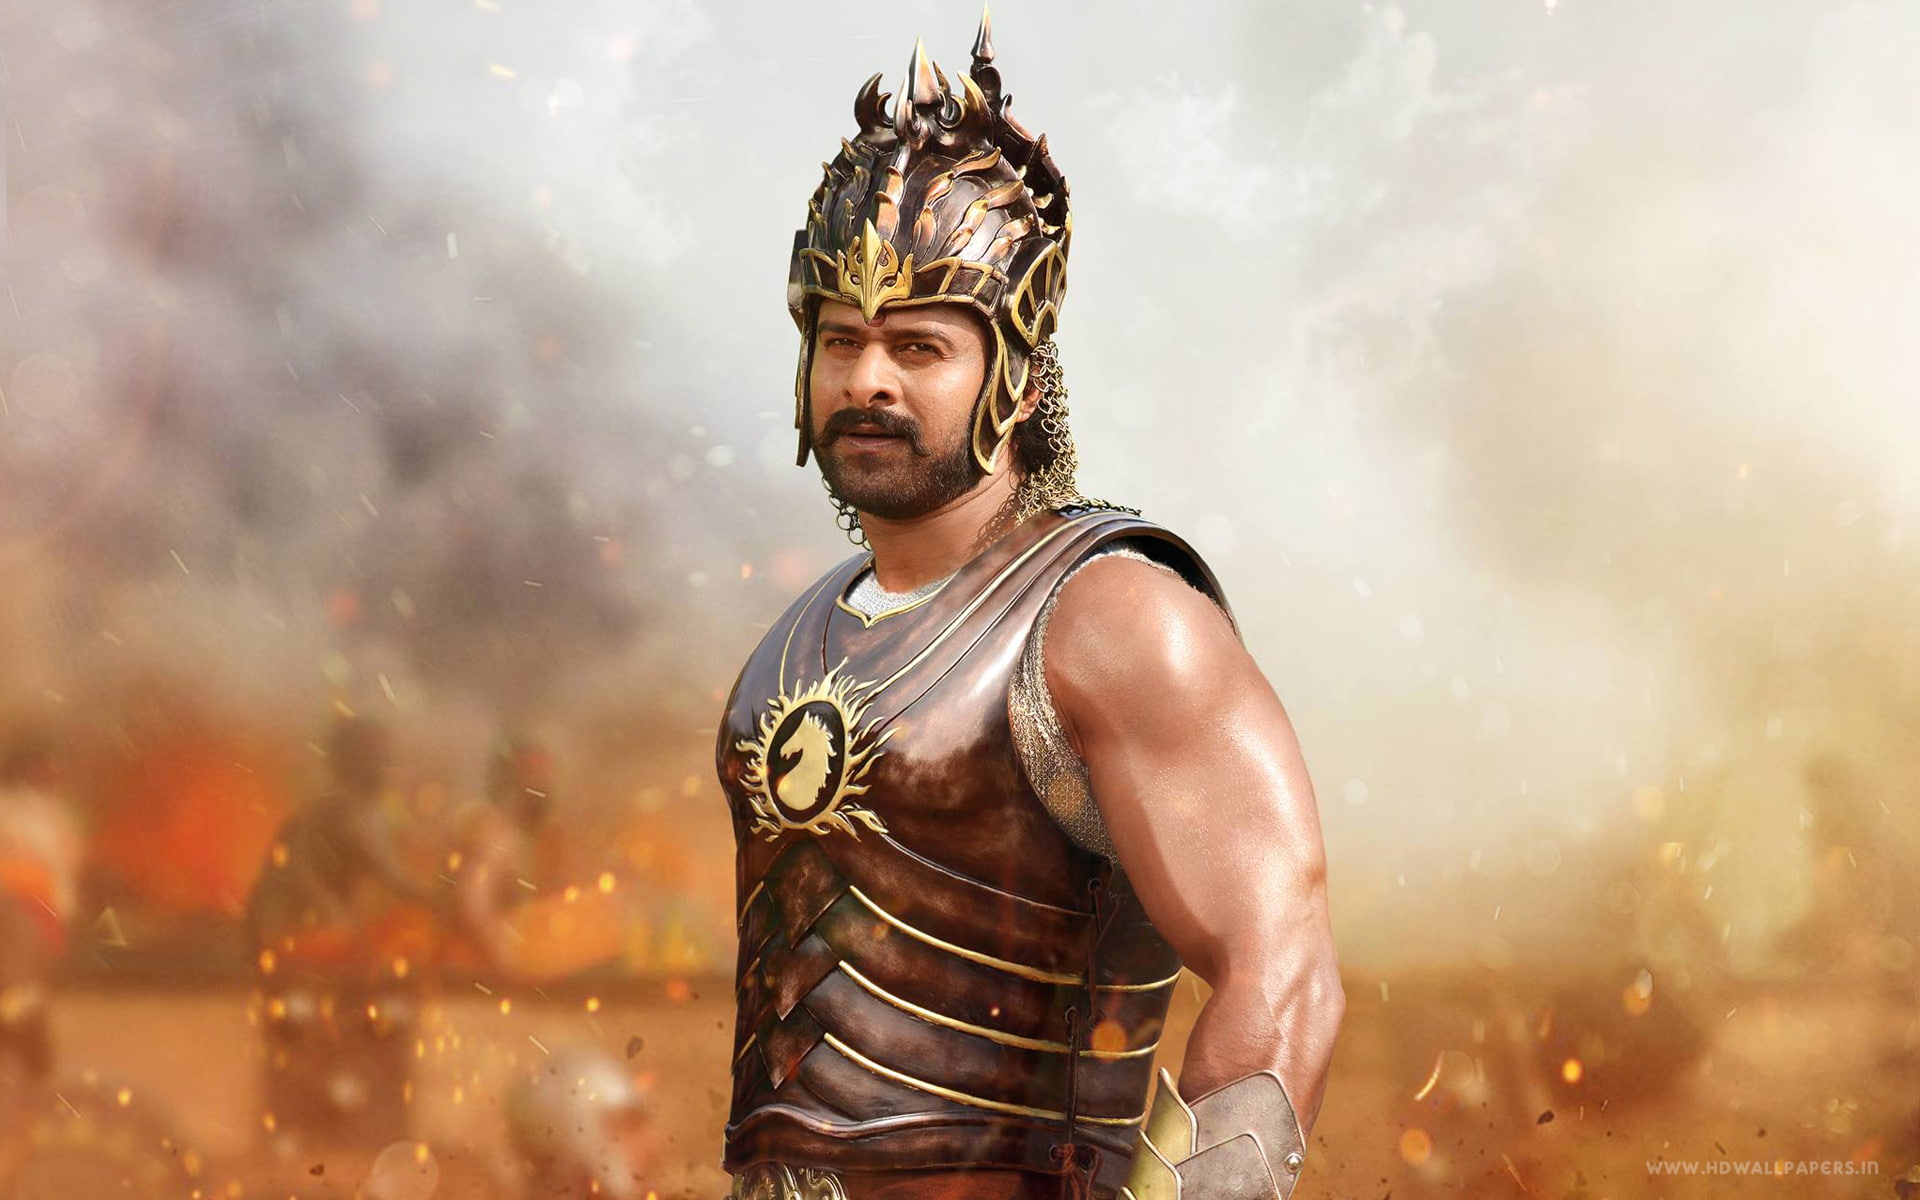 Prabhas in Baahubali, one person, waist up, young adult, front view